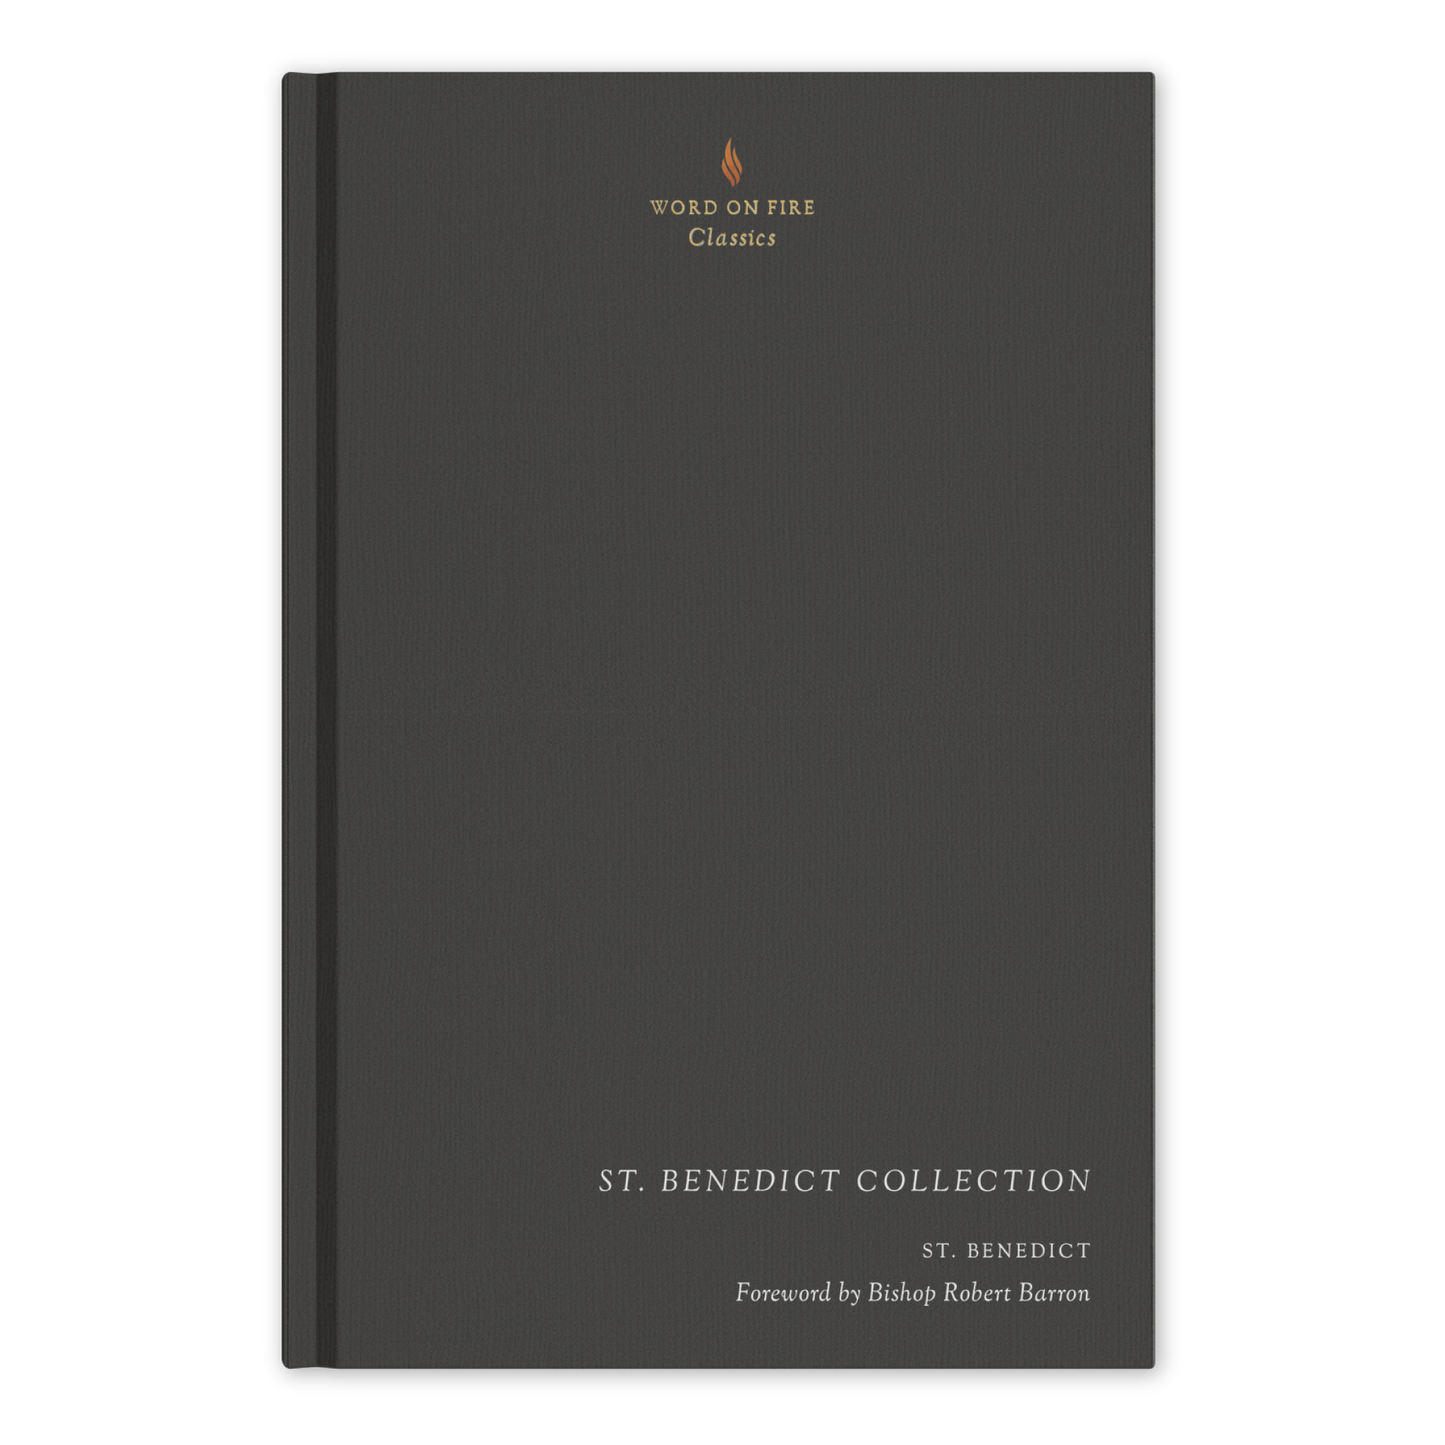 St. Benedict Collection